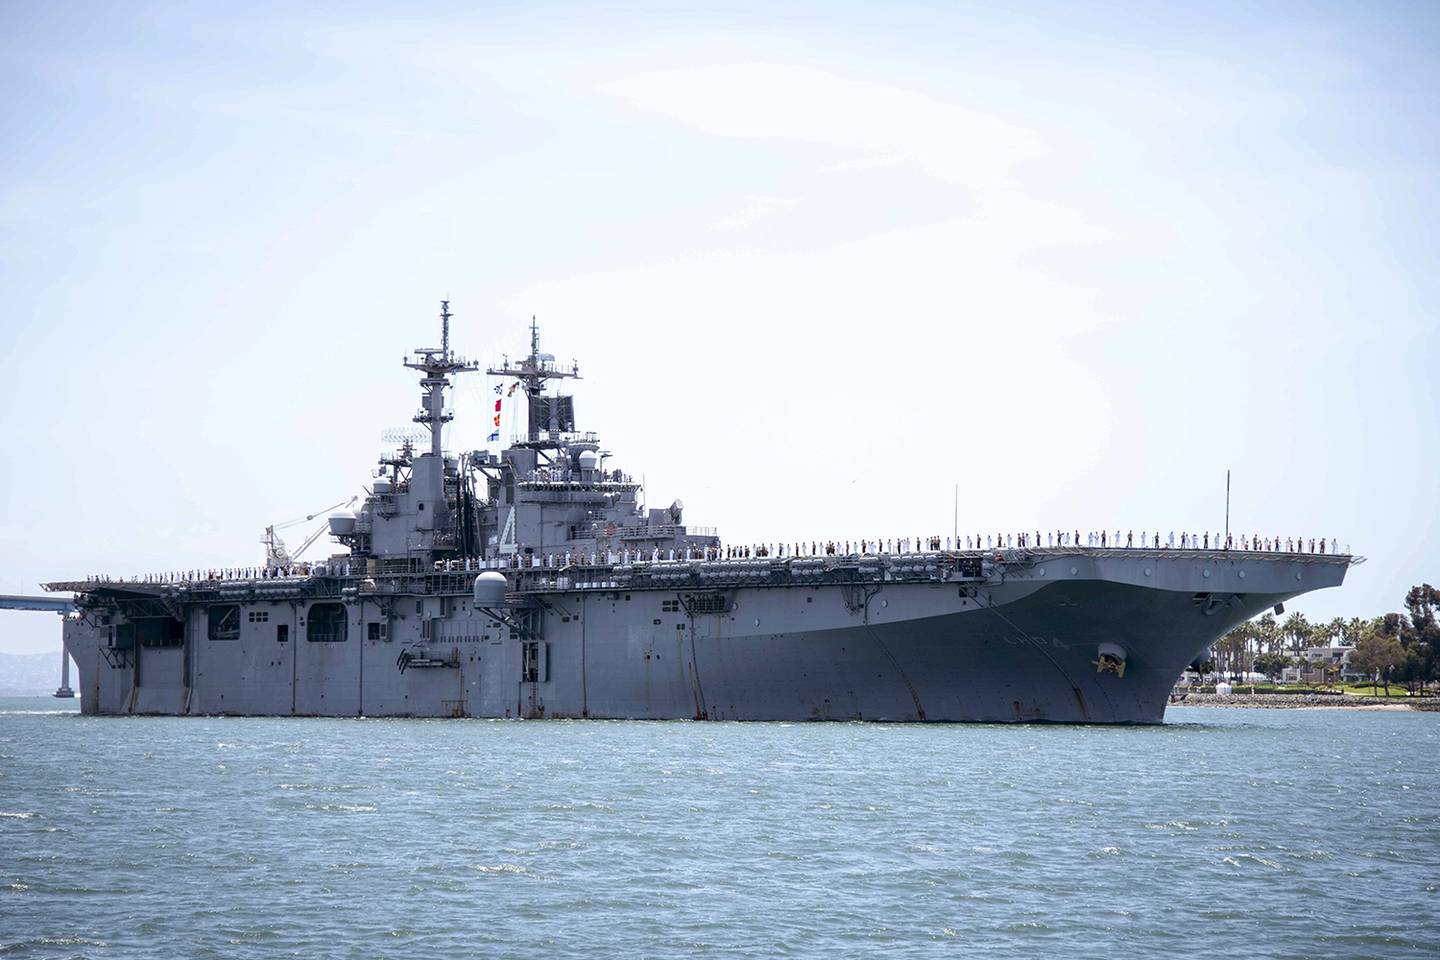 In this May 1, 2019, photo provided by the U.S. Navy, the amphibious assault ship USS Boxer (LHD 4) transits the San Diego Bay in San Diego, Calif.